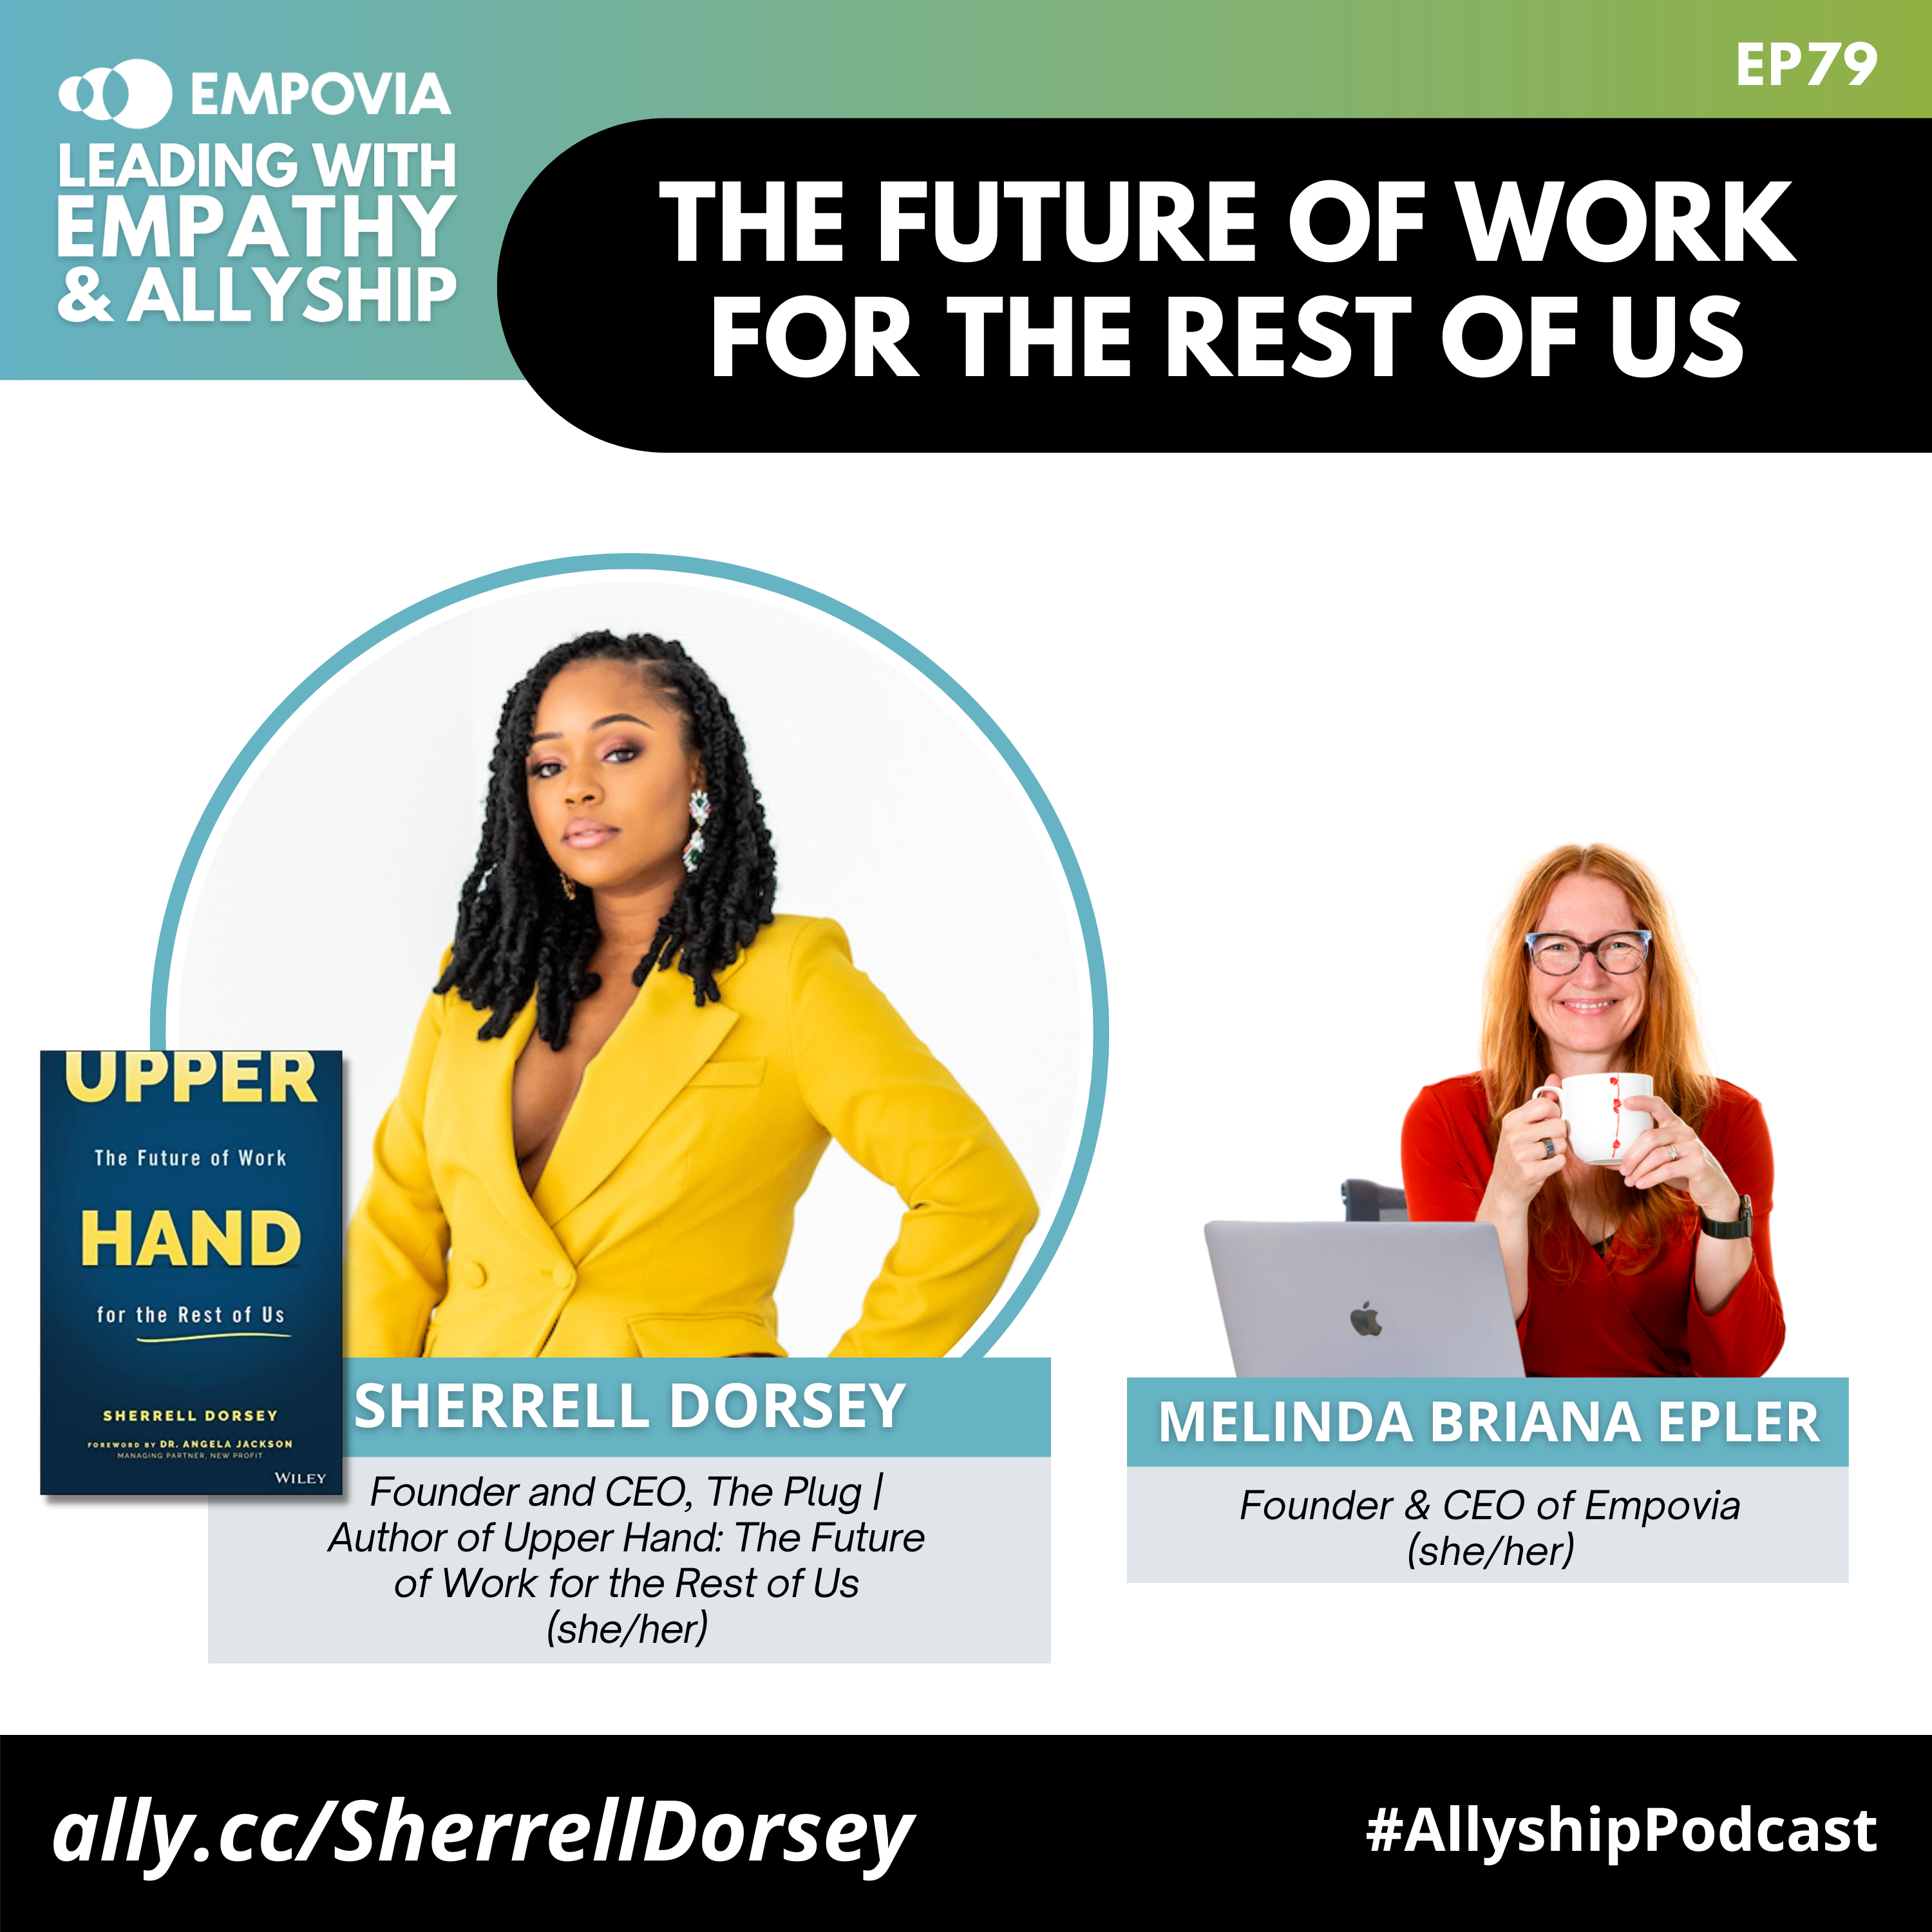 Leading With Empathy & Allyship promo with the Empovia logo and photos of Sherrell Dorsey, a Black woman with black hair in twists, silver and green statement earrings, and a yellow suit; beside her is the blue book cover of UPPER HAND: The Future of Work for the Rest of Us; and host Melinda Briana Epler, a White woman with red hair, glasses, and orange shirt holding a white mug behind a laptop.